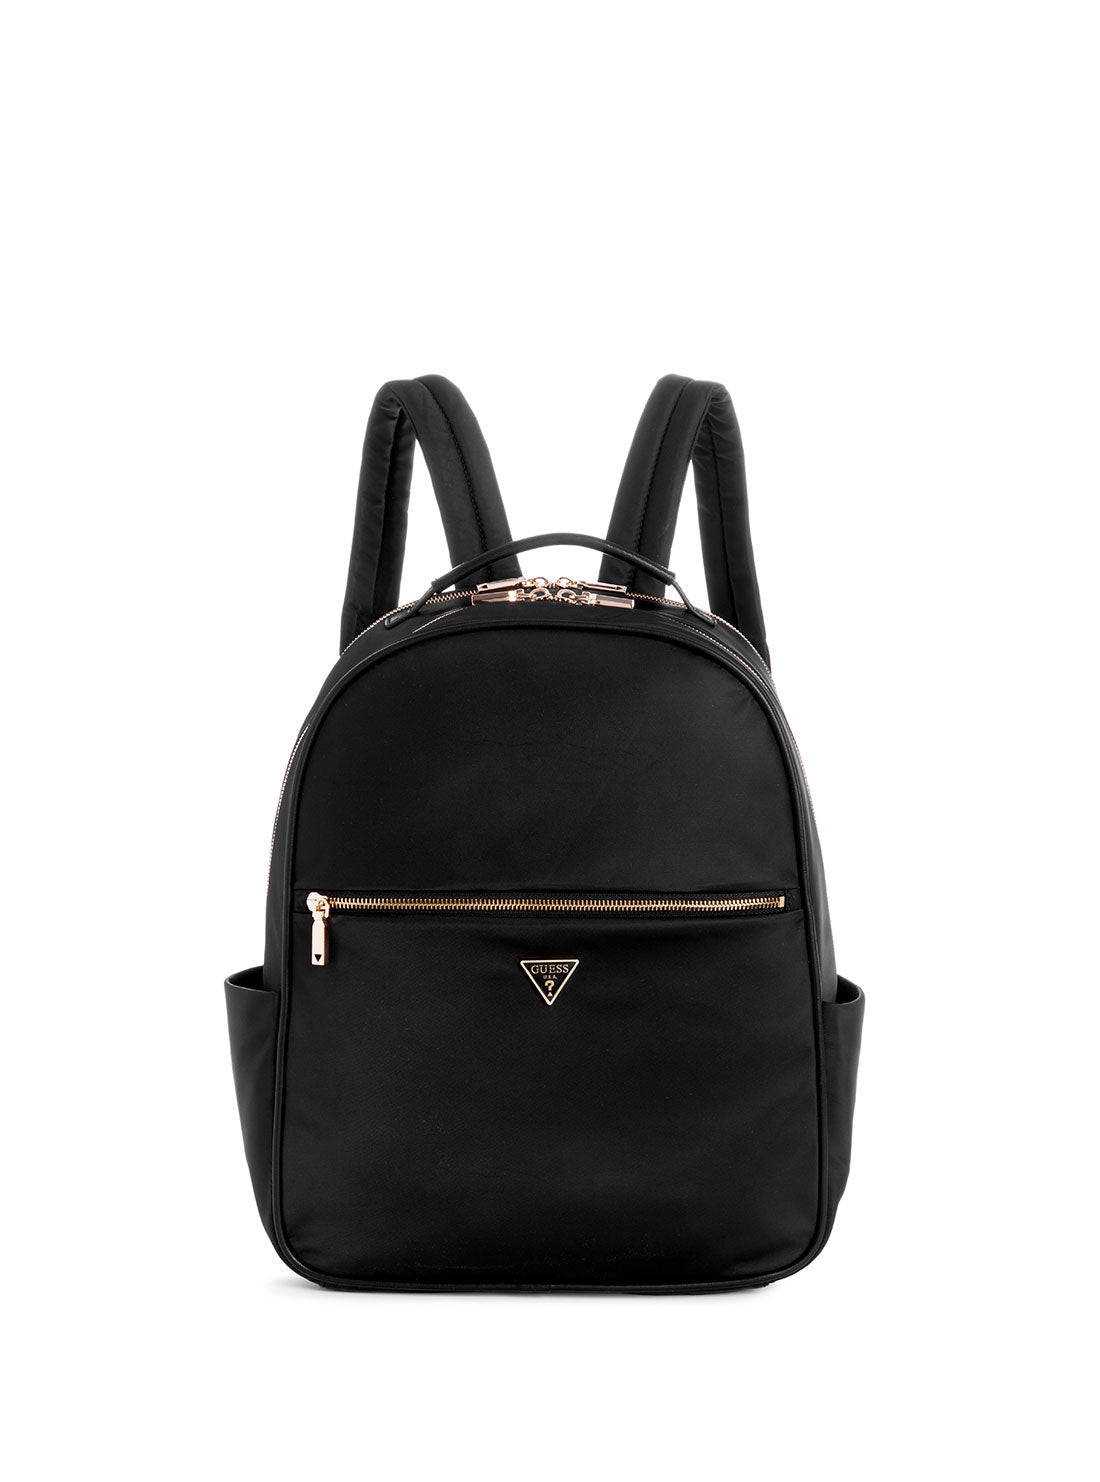 GUESS Women's Black Power Play Tech Nylon Backpack YG900630 Front View